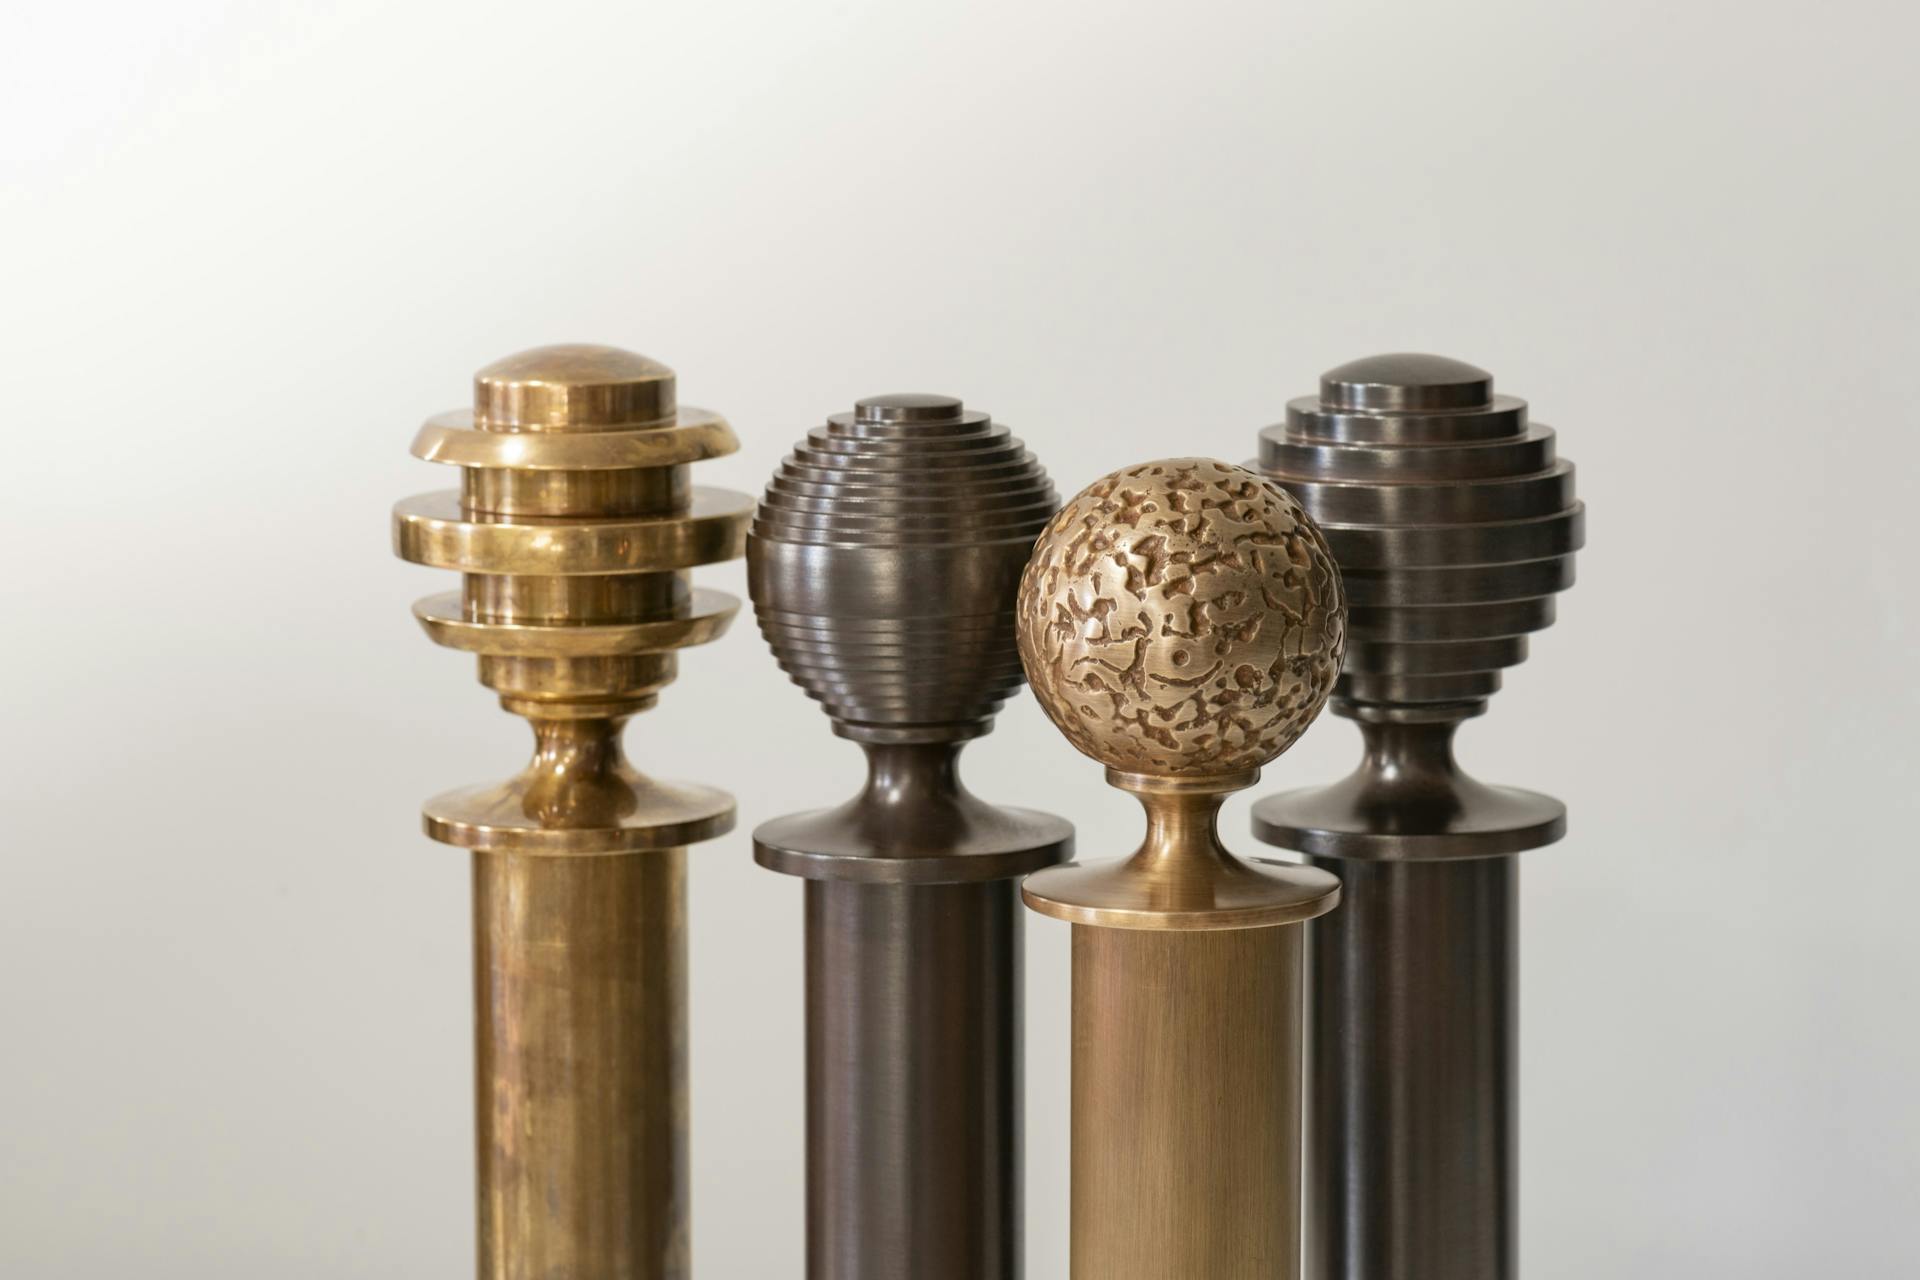 Selection of new finials